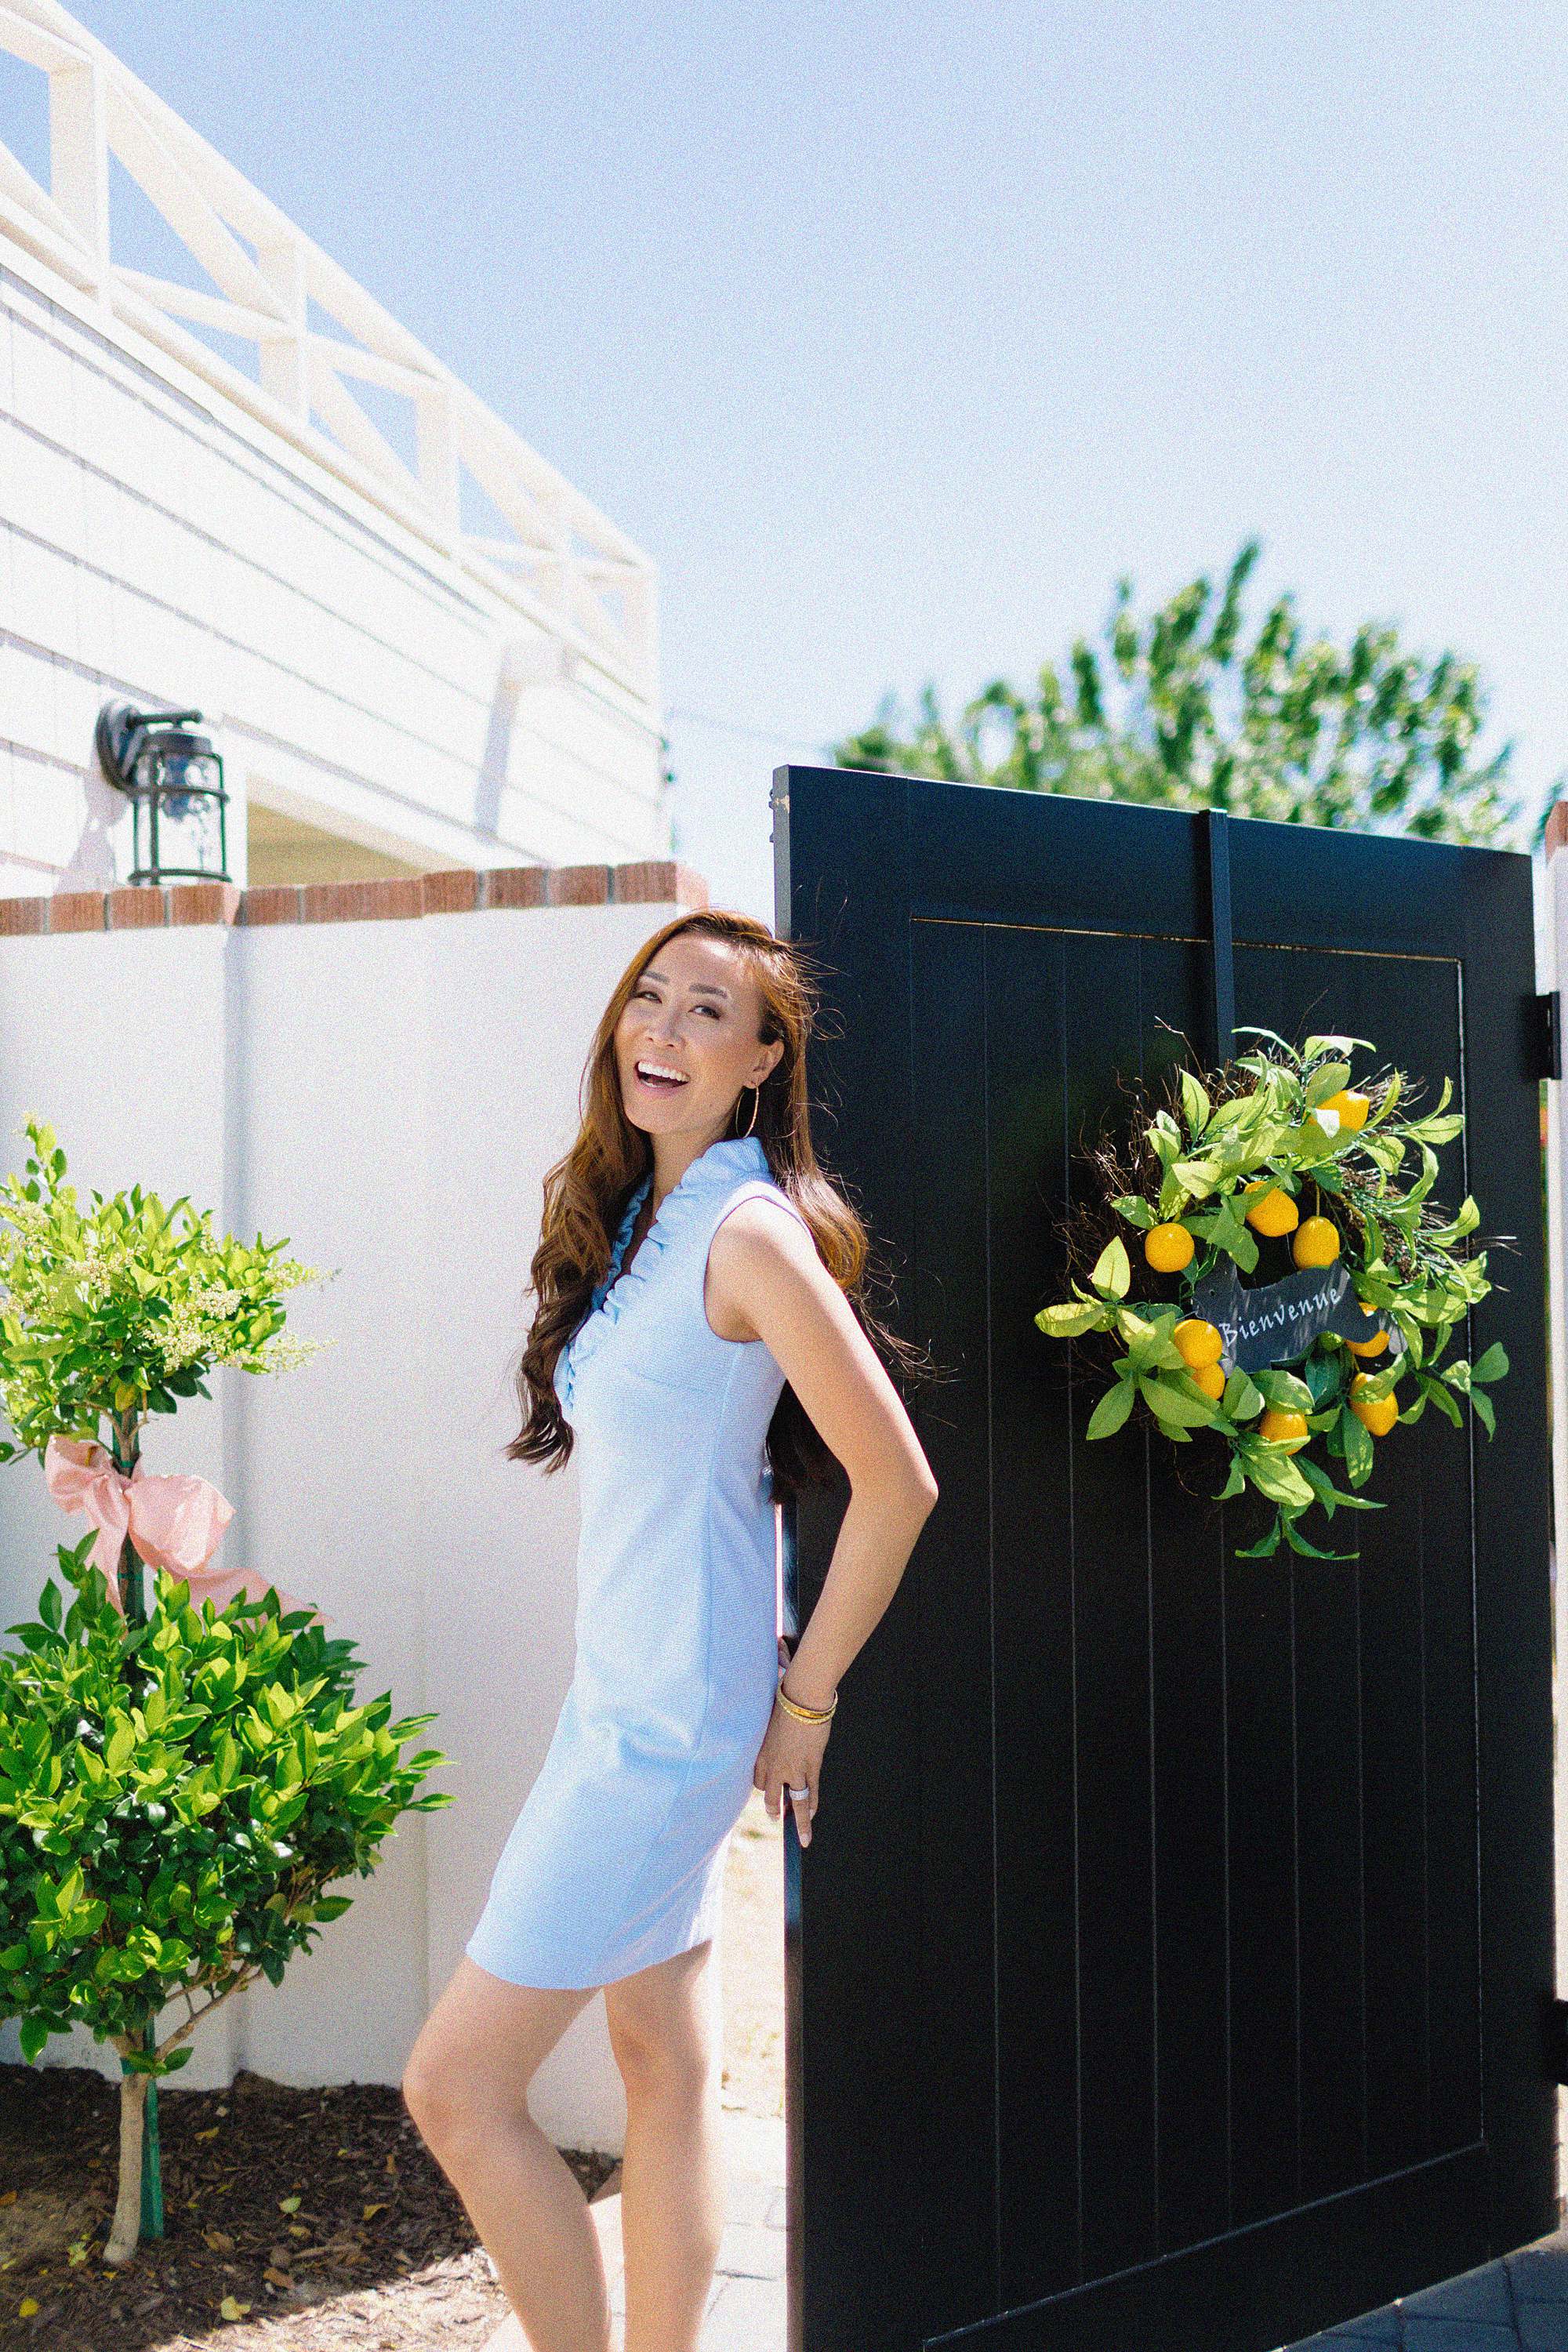 Lilly Pulitzer TISBURY SHIFT DRESS ruffle blue spring dress on blogger in front of black gate going into garden